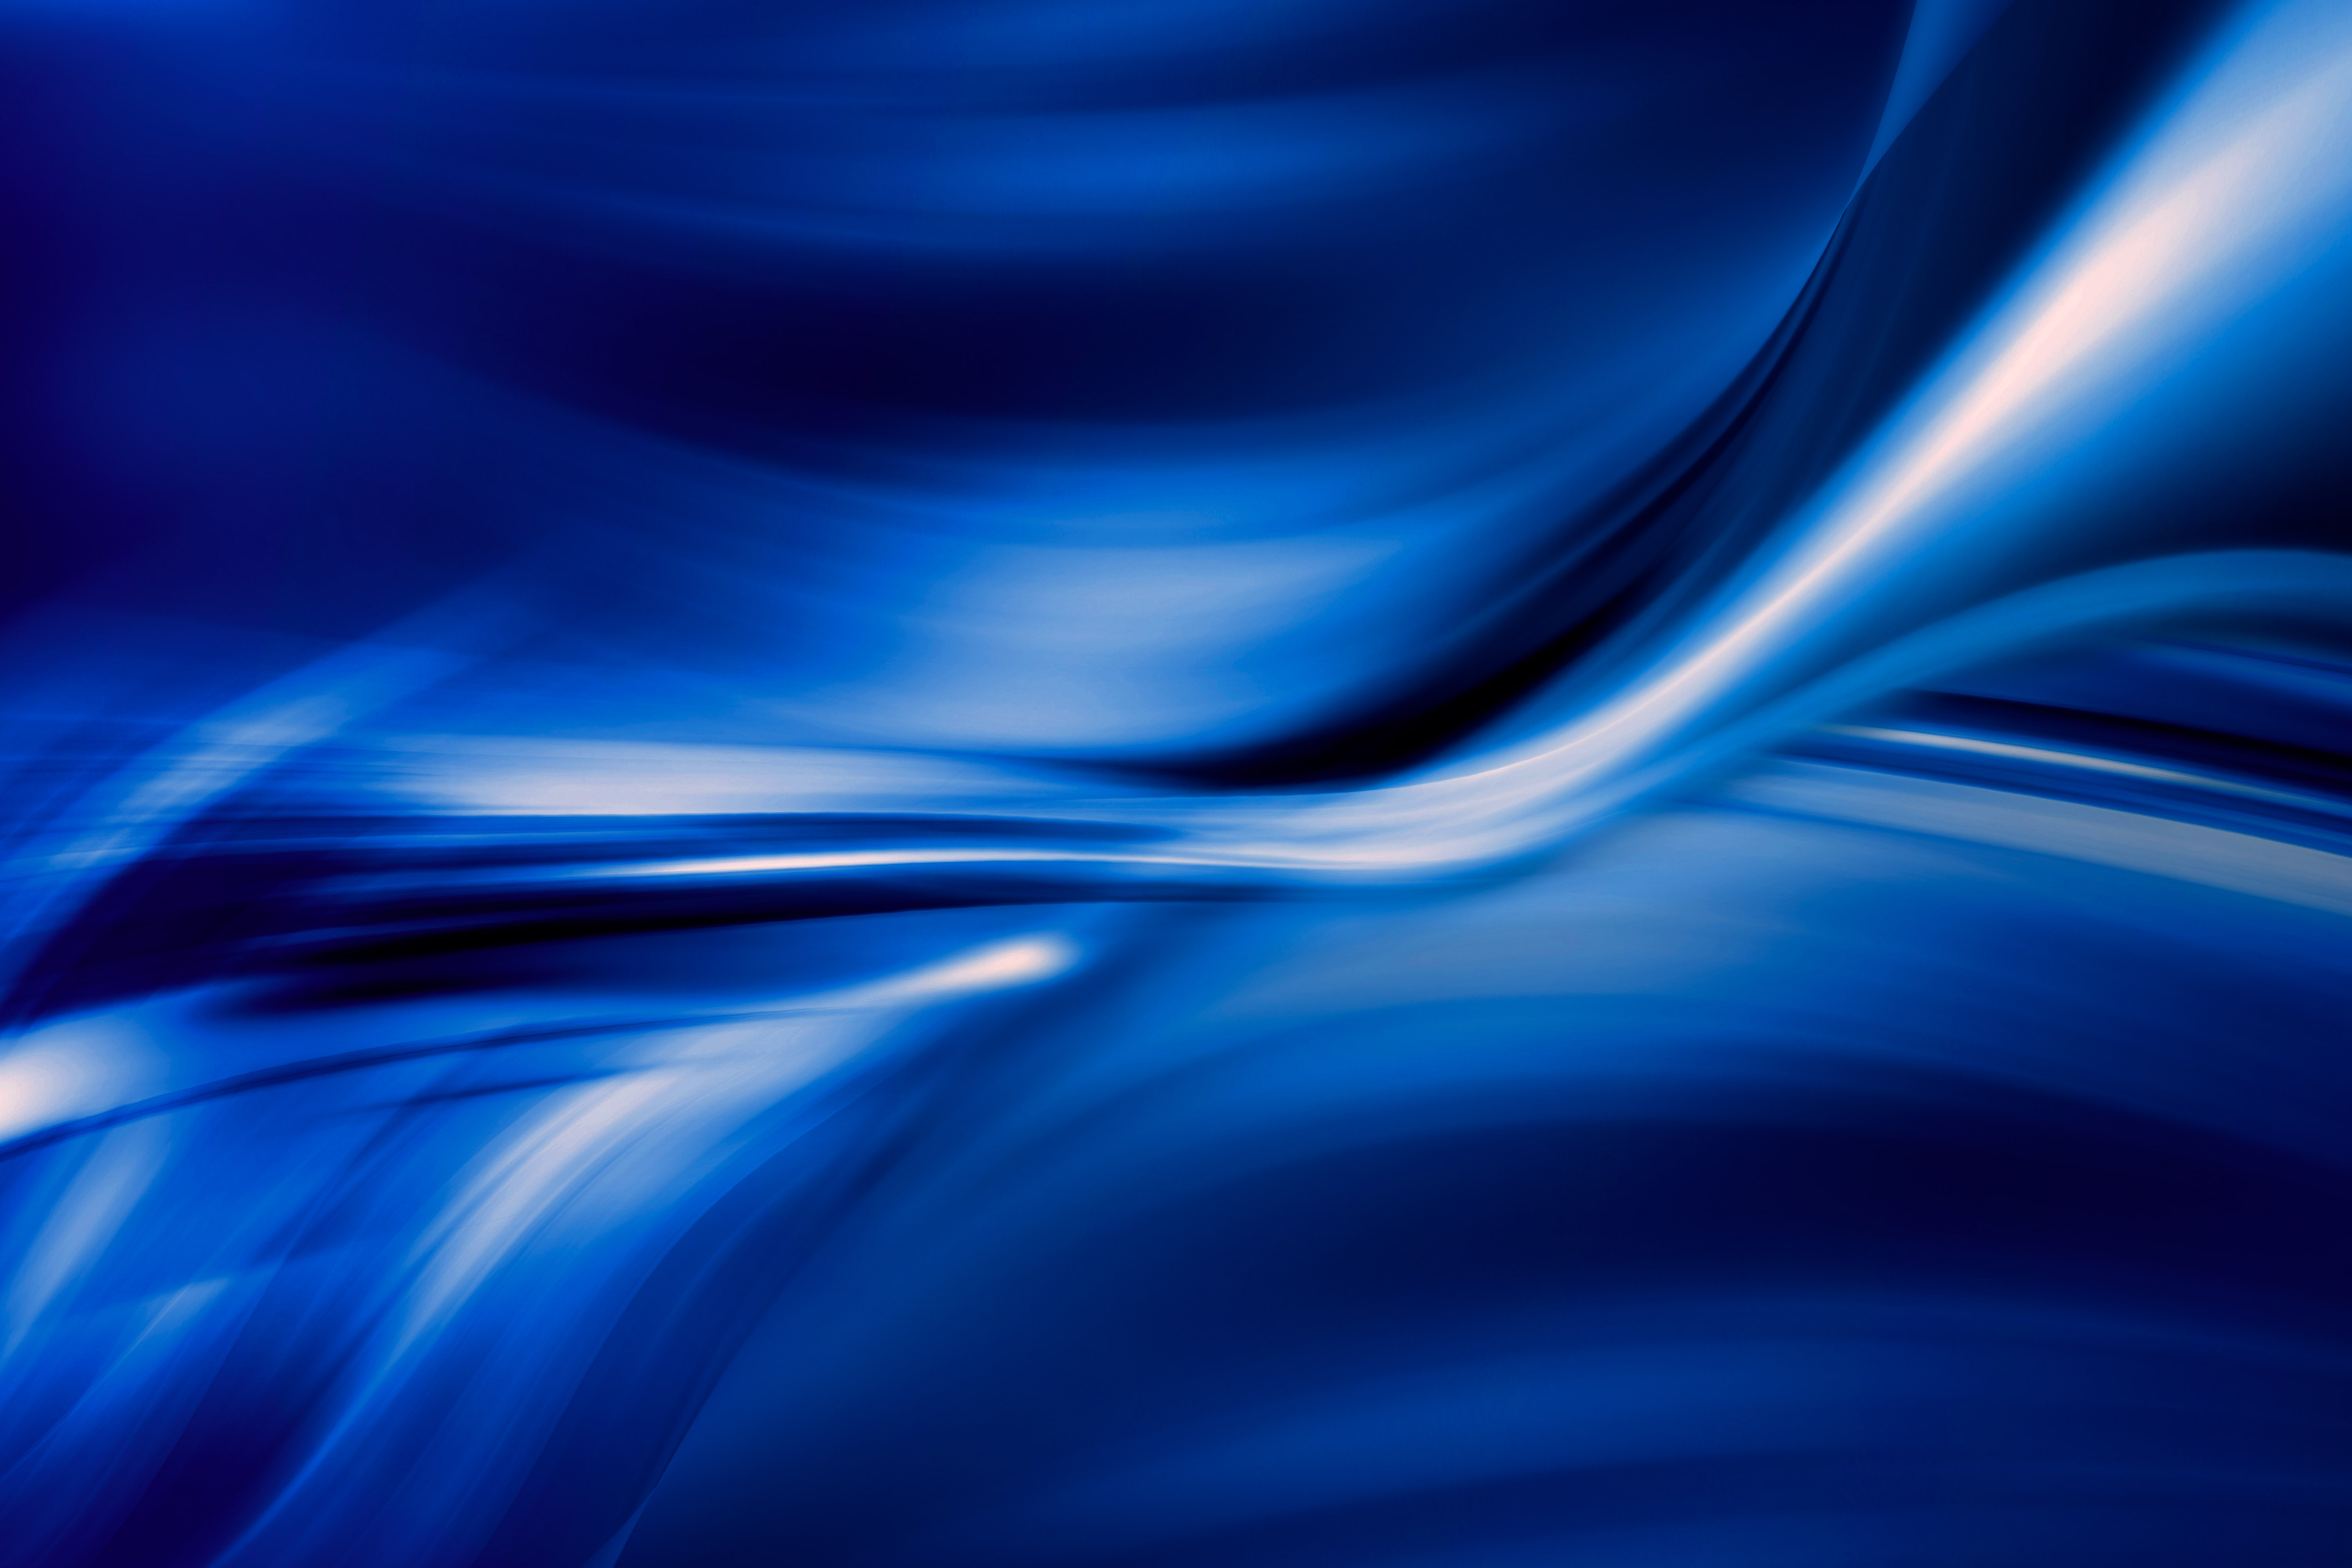 Light and dark abstract blue background | www.myfreetextures.com | Free